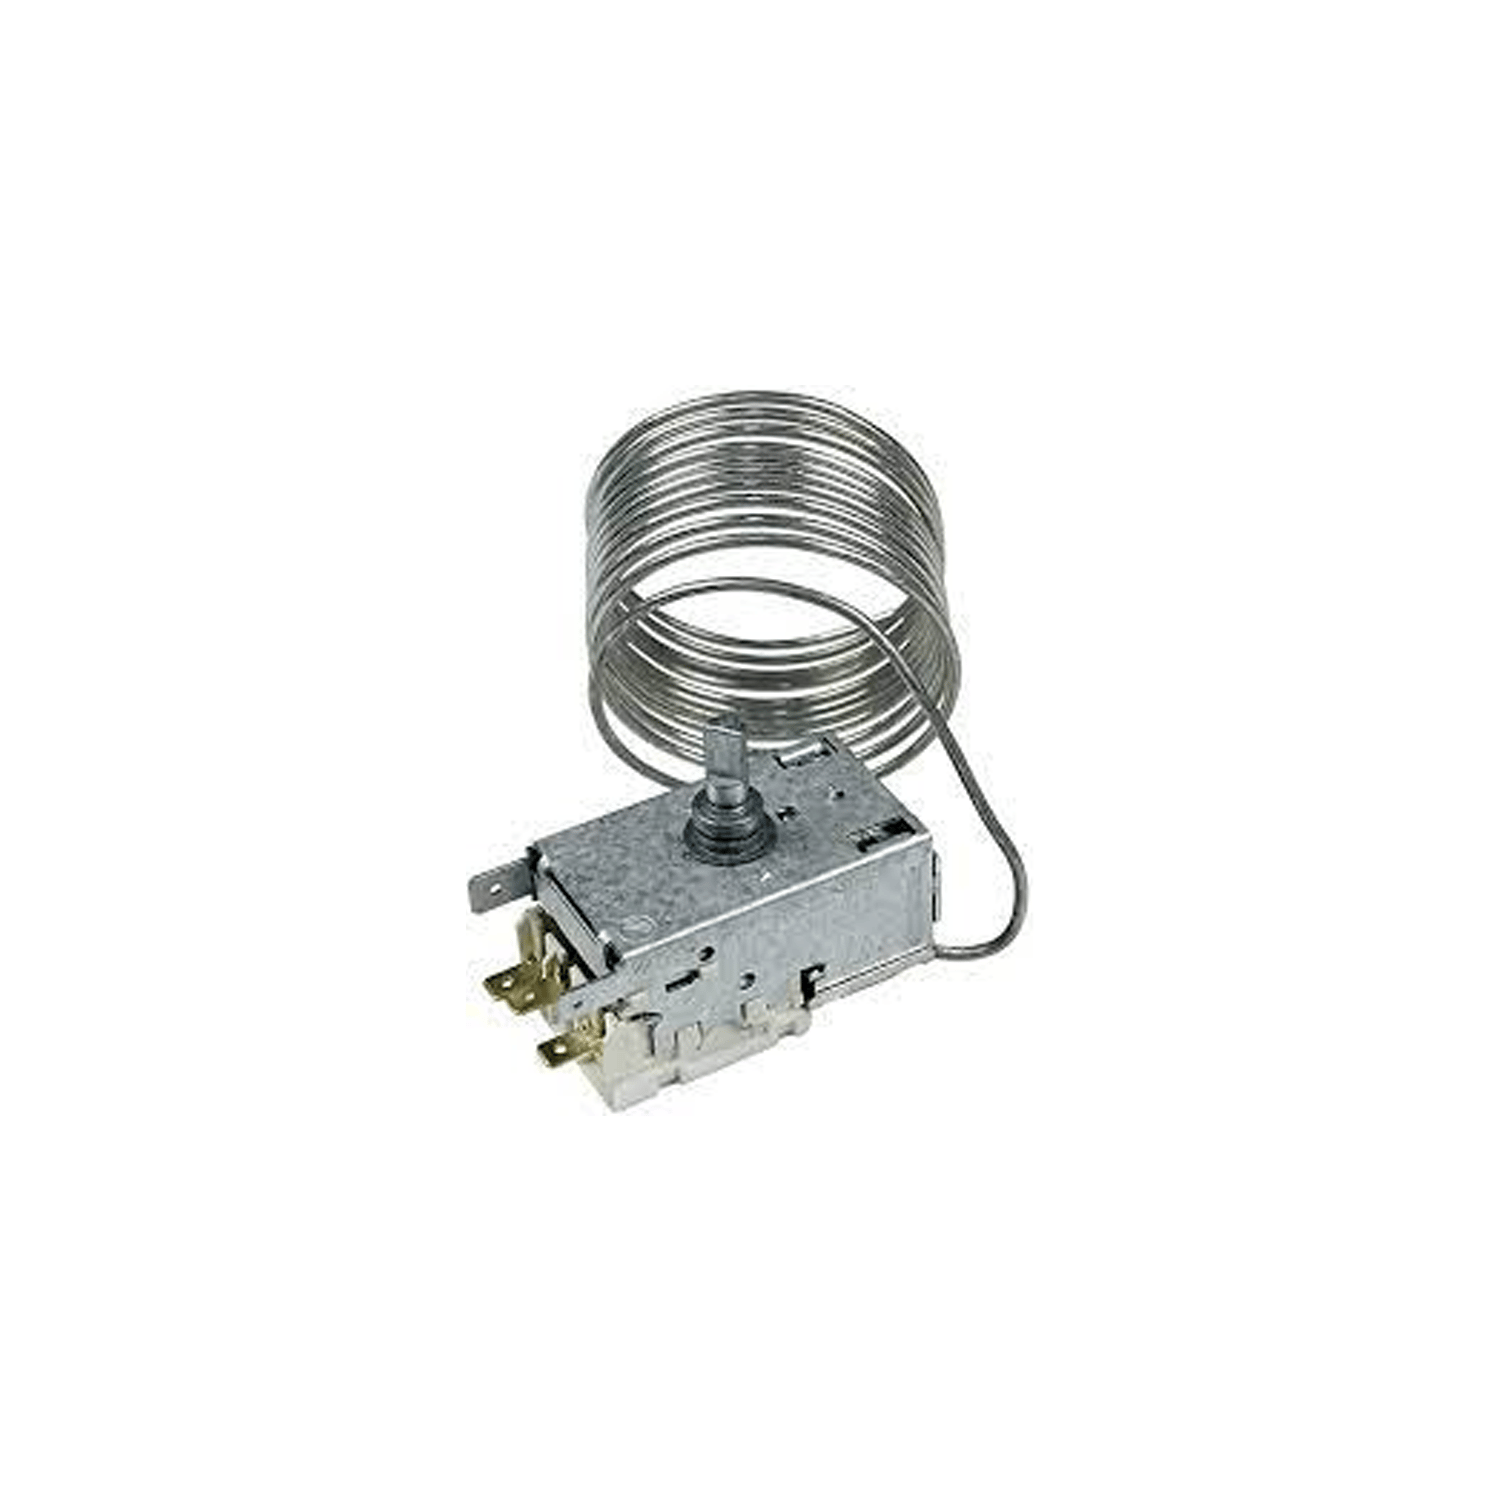 Thermostat Ranco K57-L5554 for Liebherr 6151194, Miele 5783331